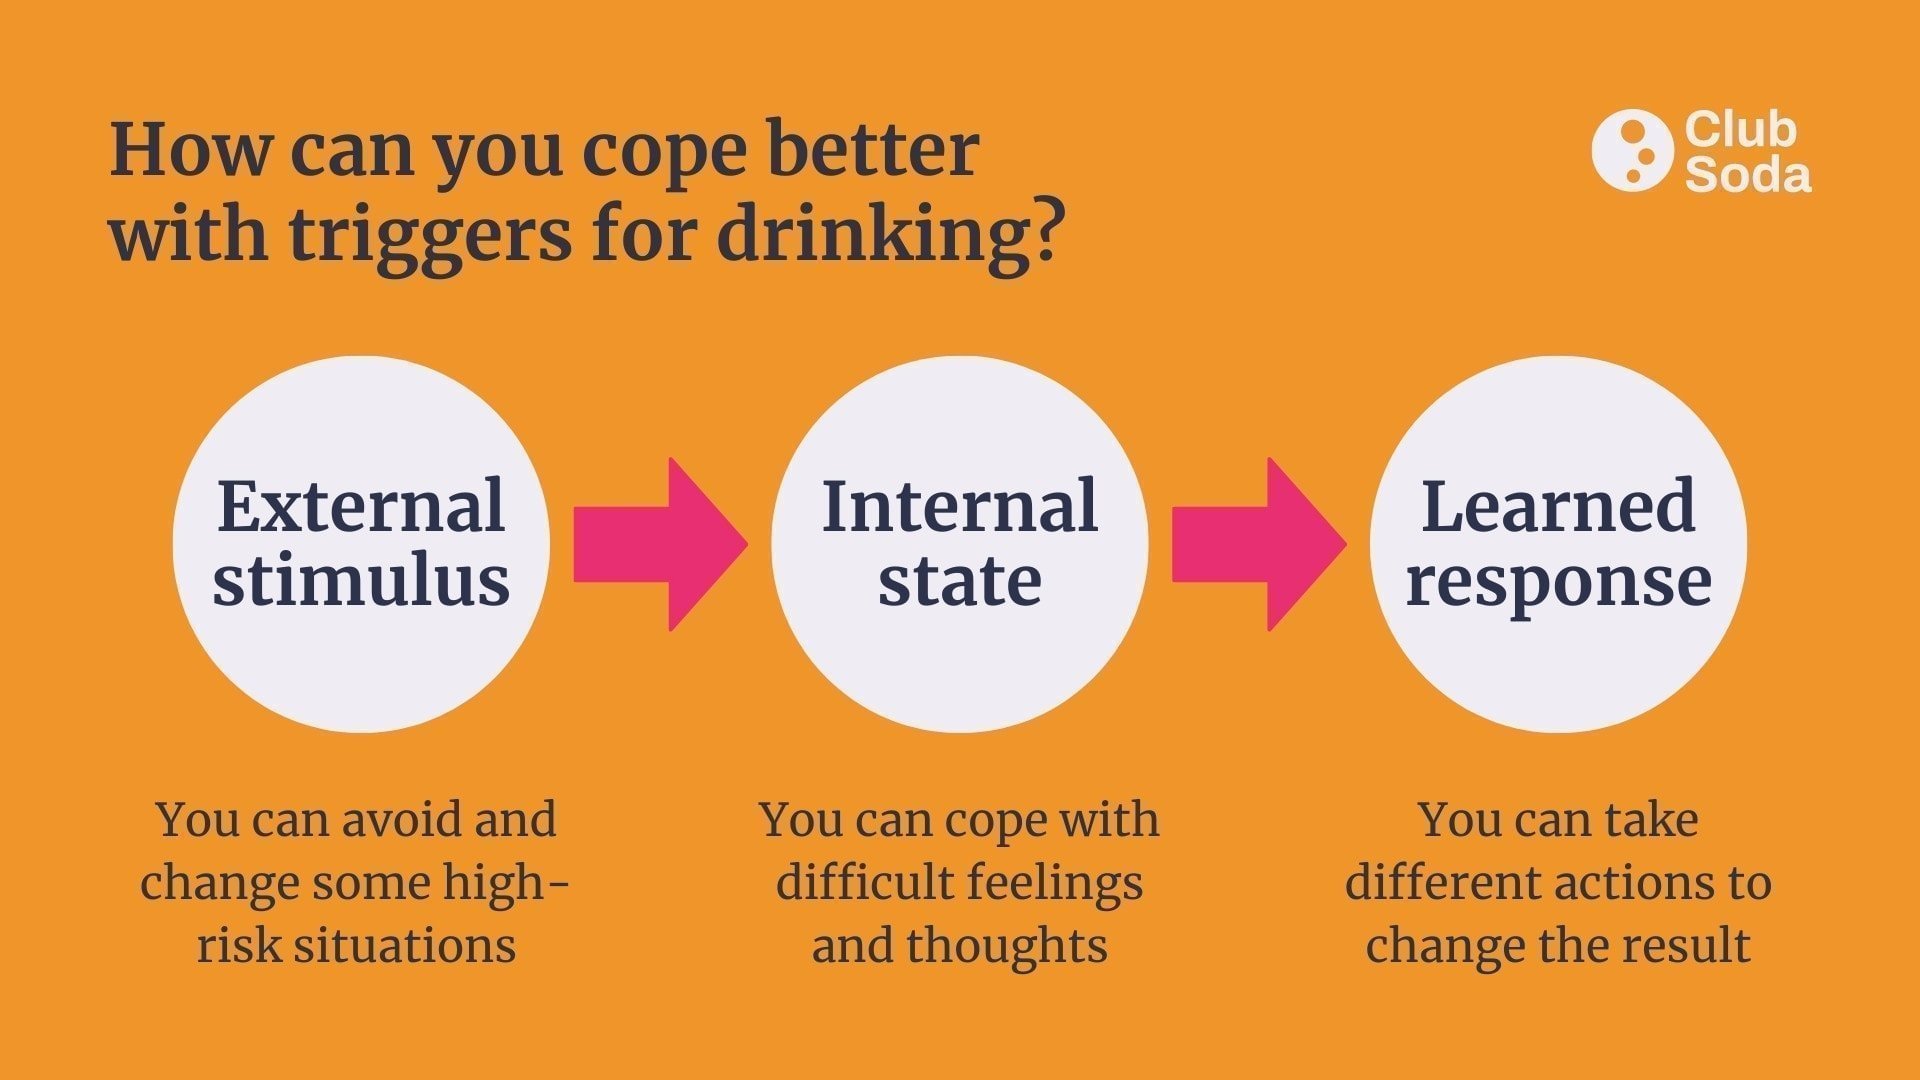 Hoe dan ook Mm Gespierd 3 ways to cope with triggers for drinking - Club Soda